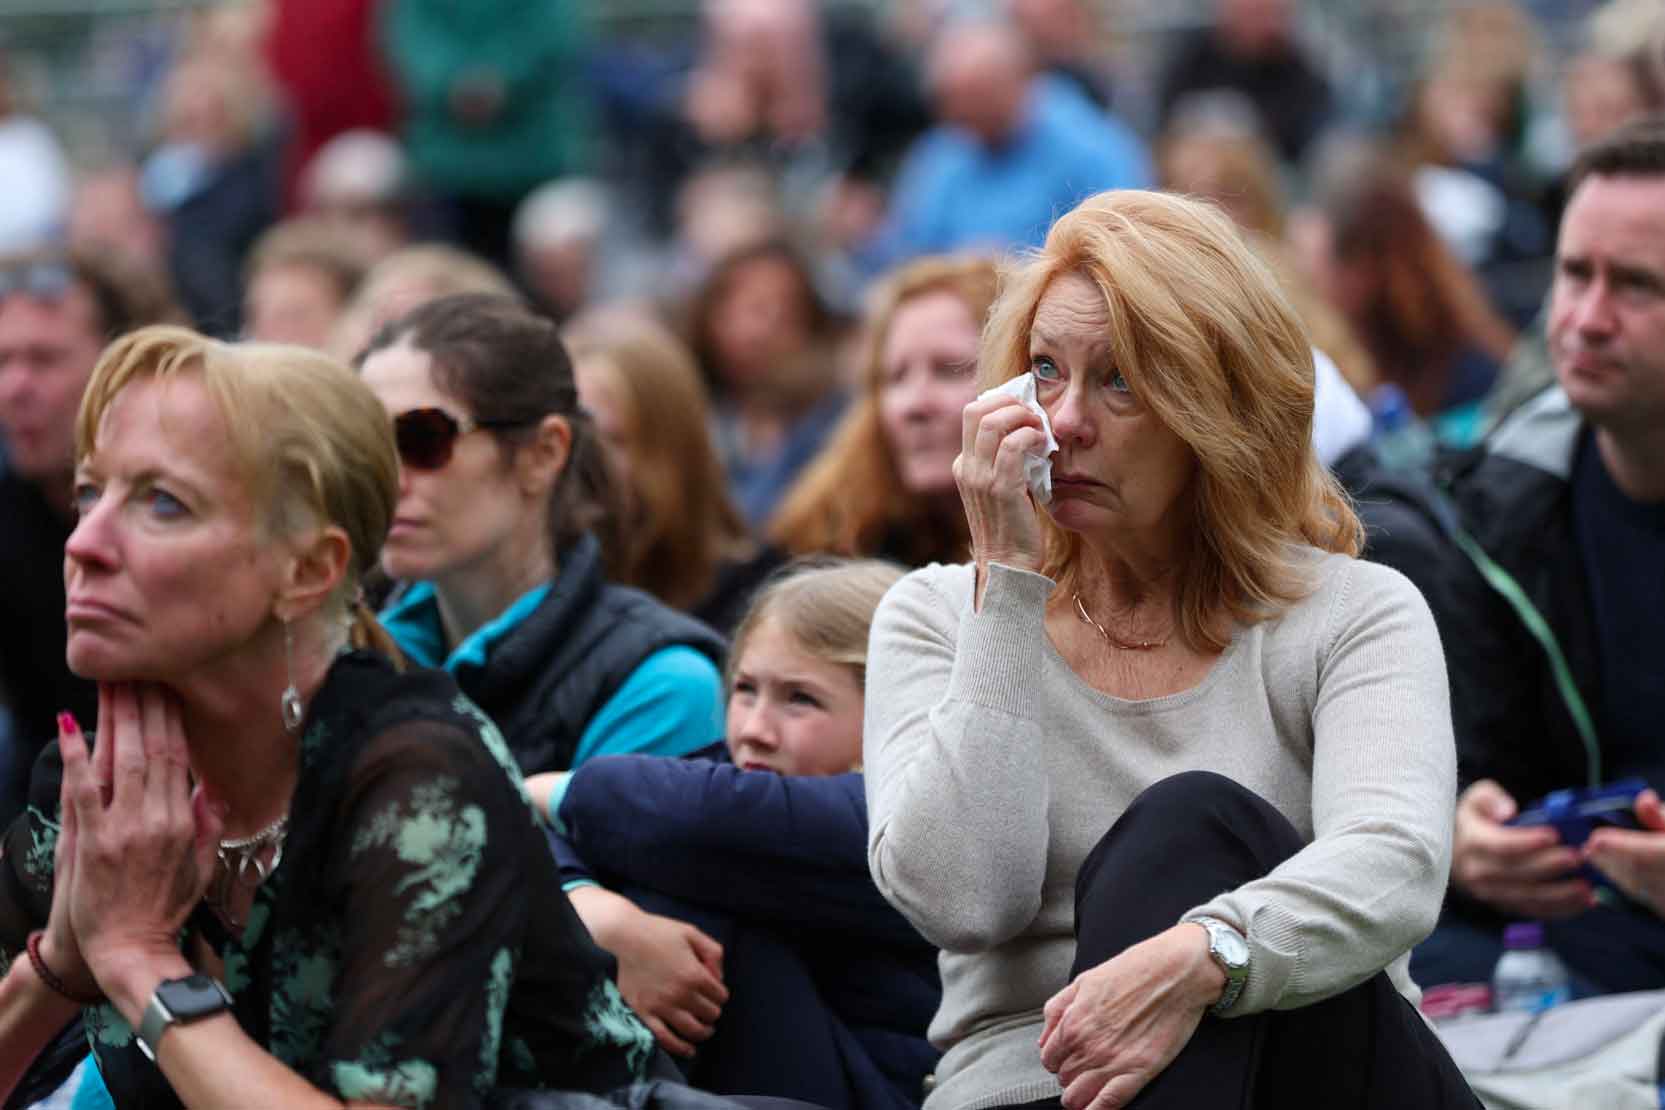 A woman watching the funeral on a big screen wipes away a tear.